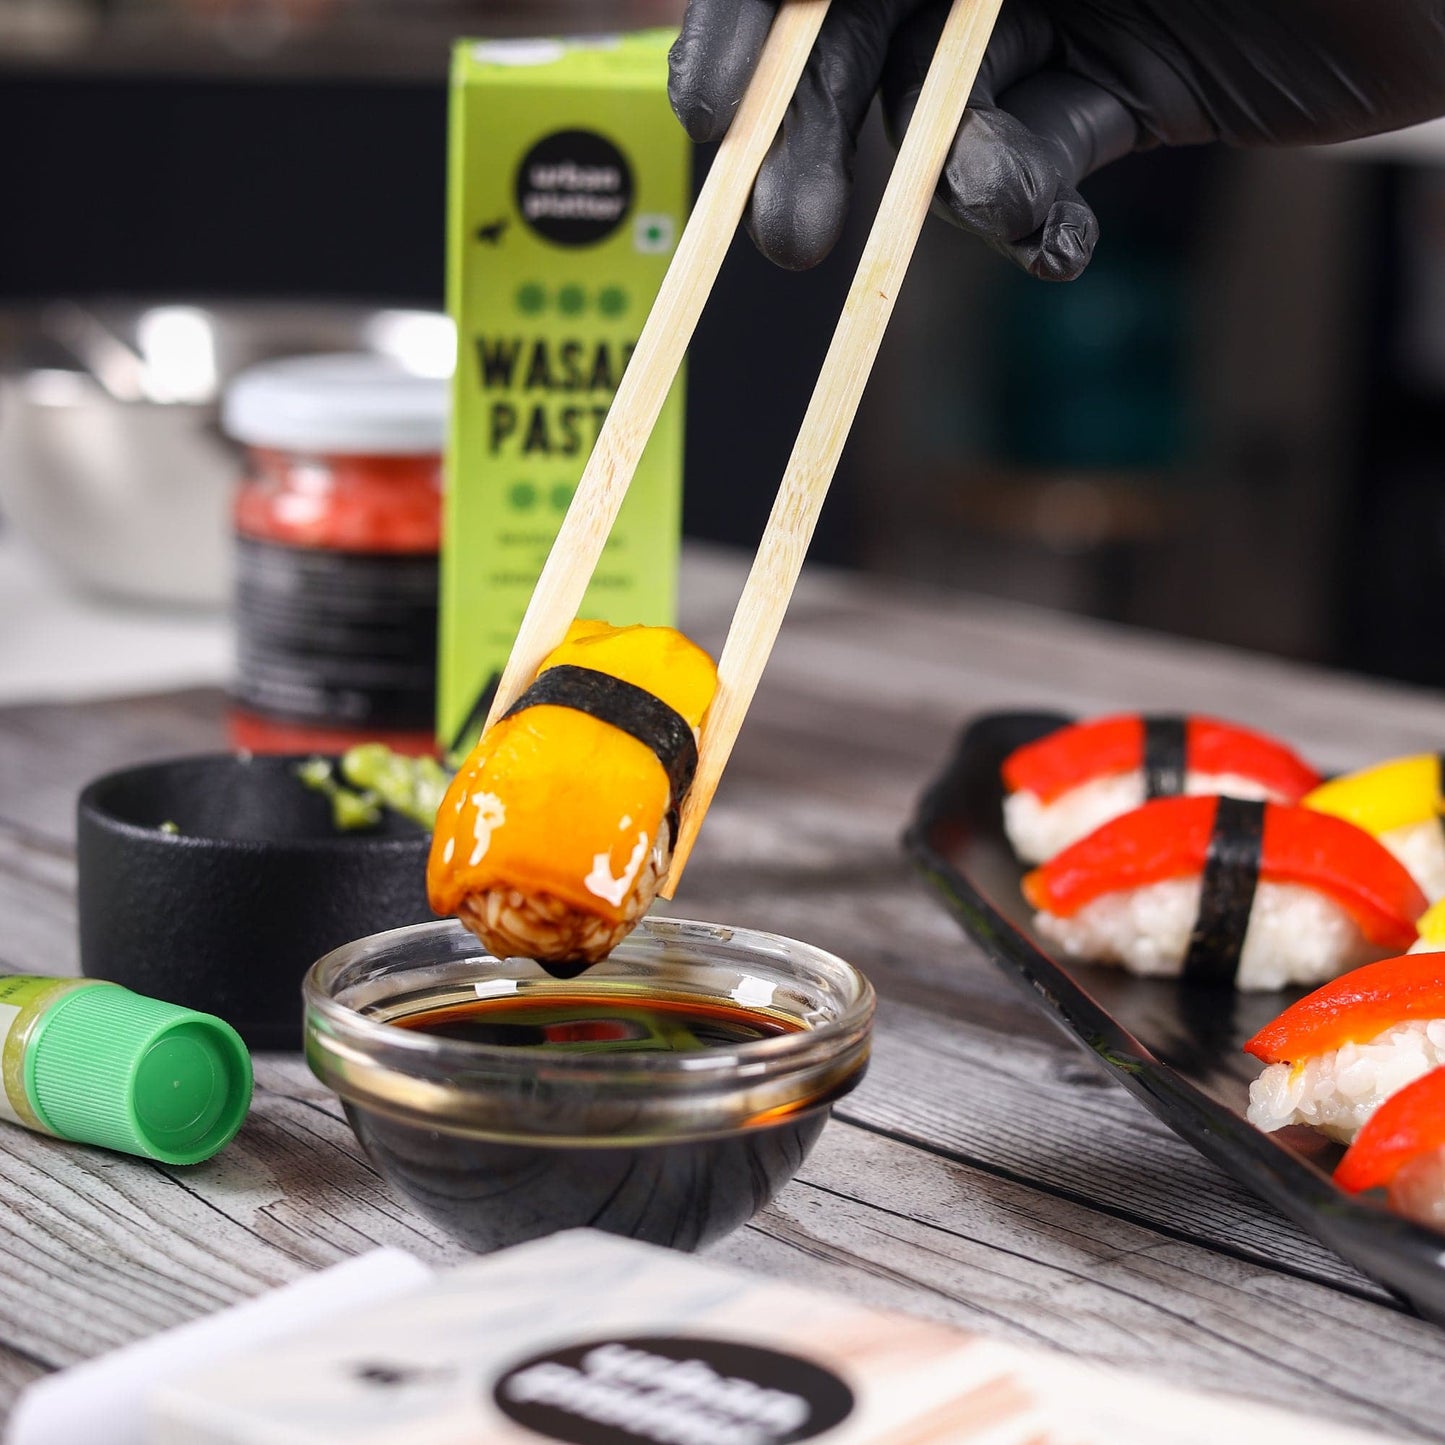 Urban Platter Premium Wasabi Paste, 43g (Elevate Your Sushi Experience with Lingering Zing)